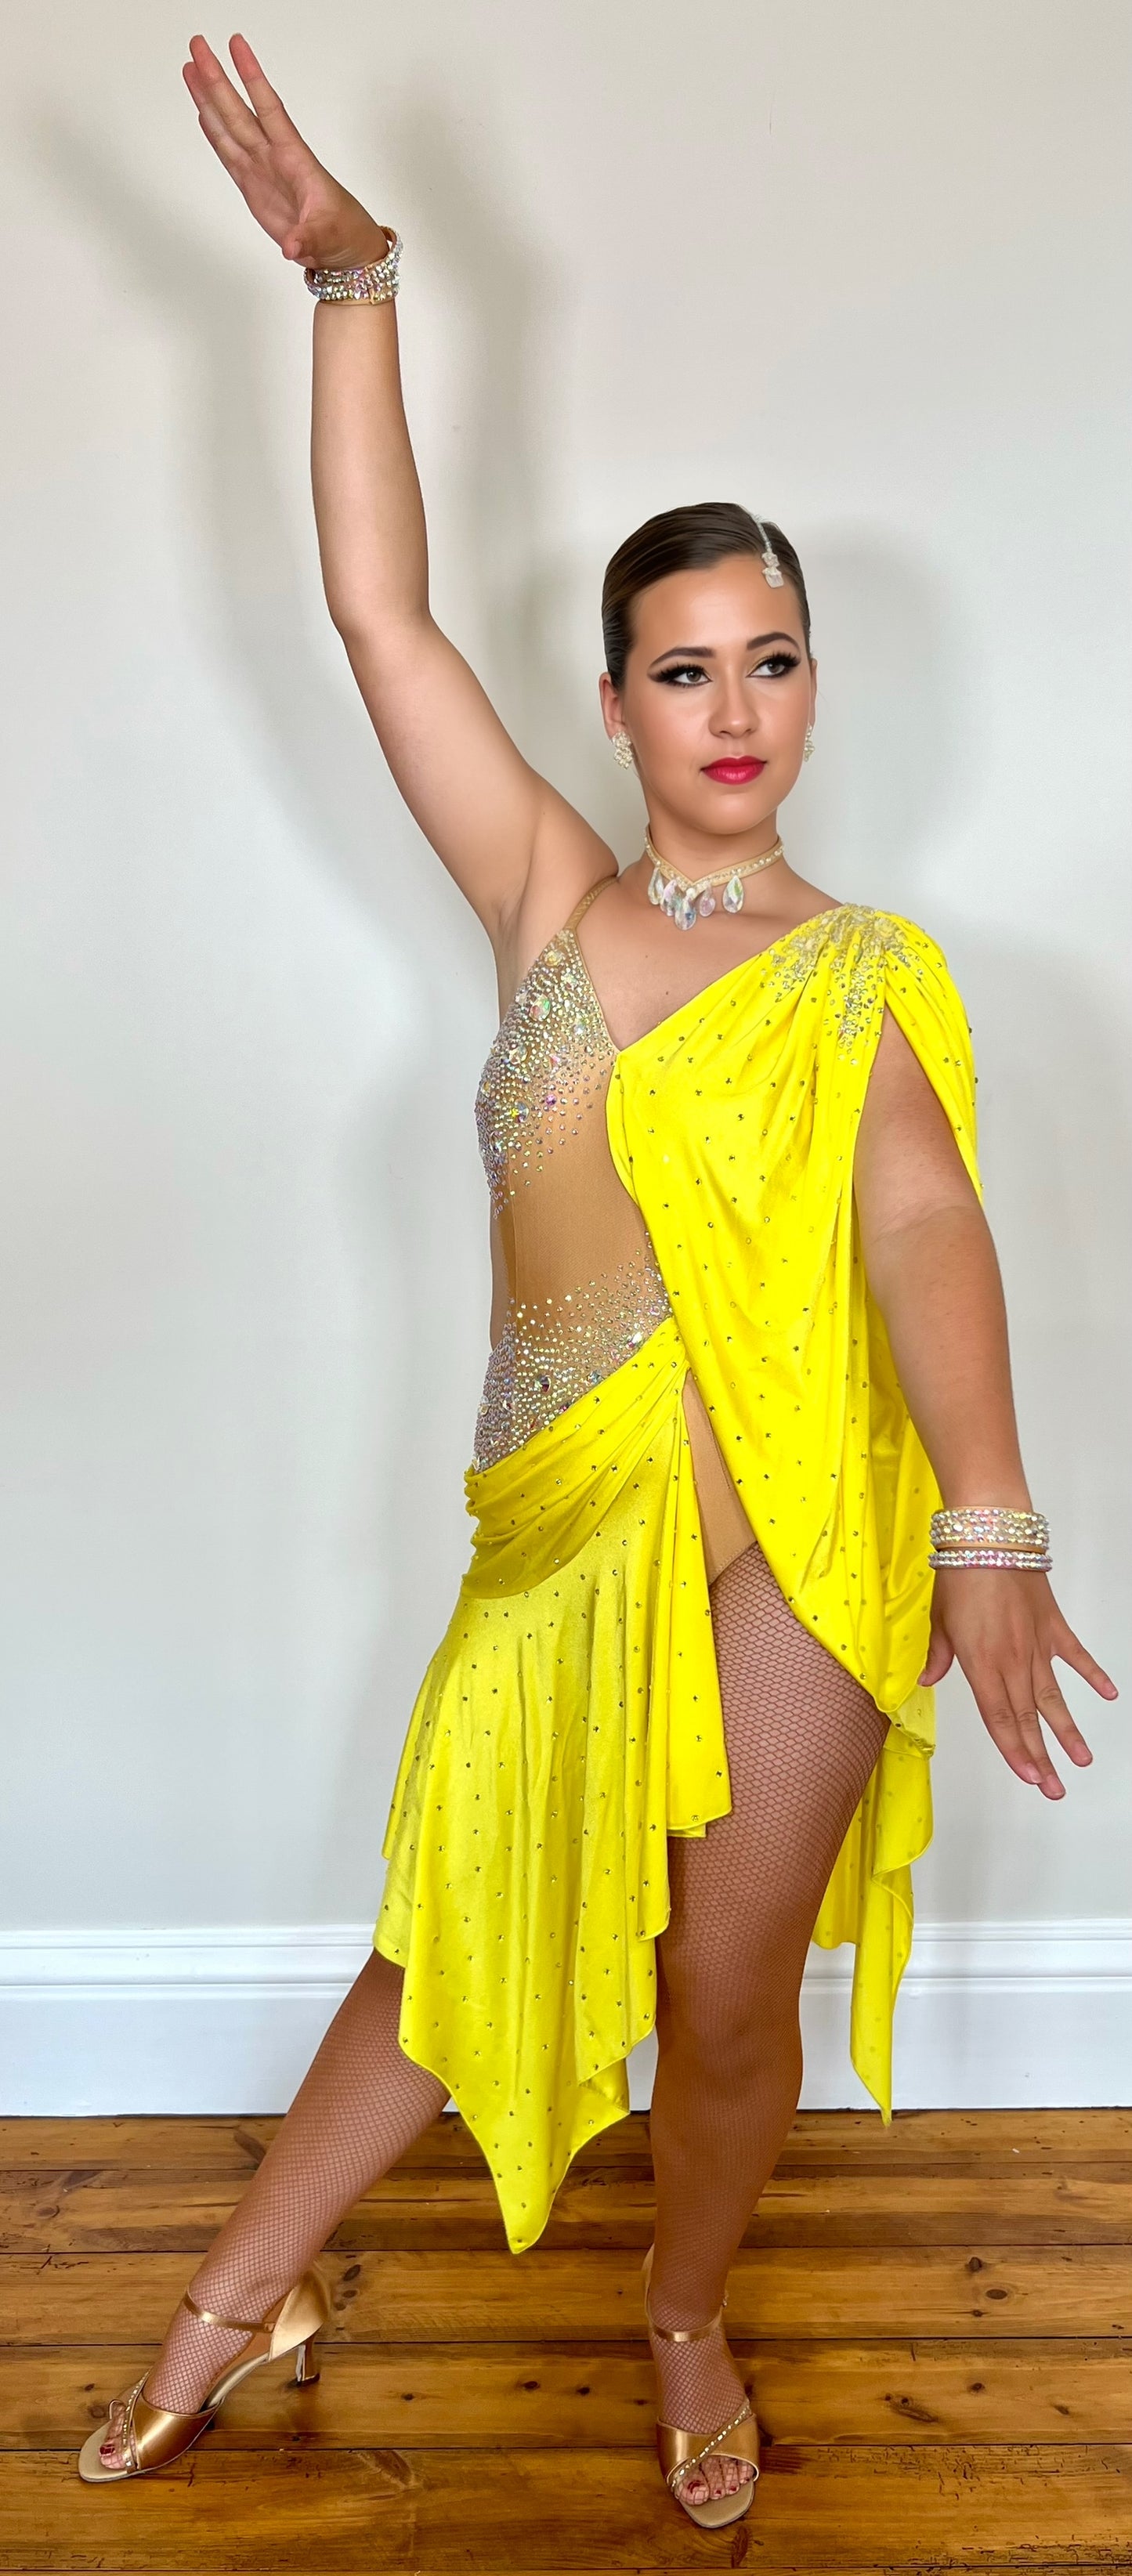 083 Yellow Lycra one Shoulder Latin Dress. Flesh leotard decorated in AB stones. Full frilled skirt for maximum movement.